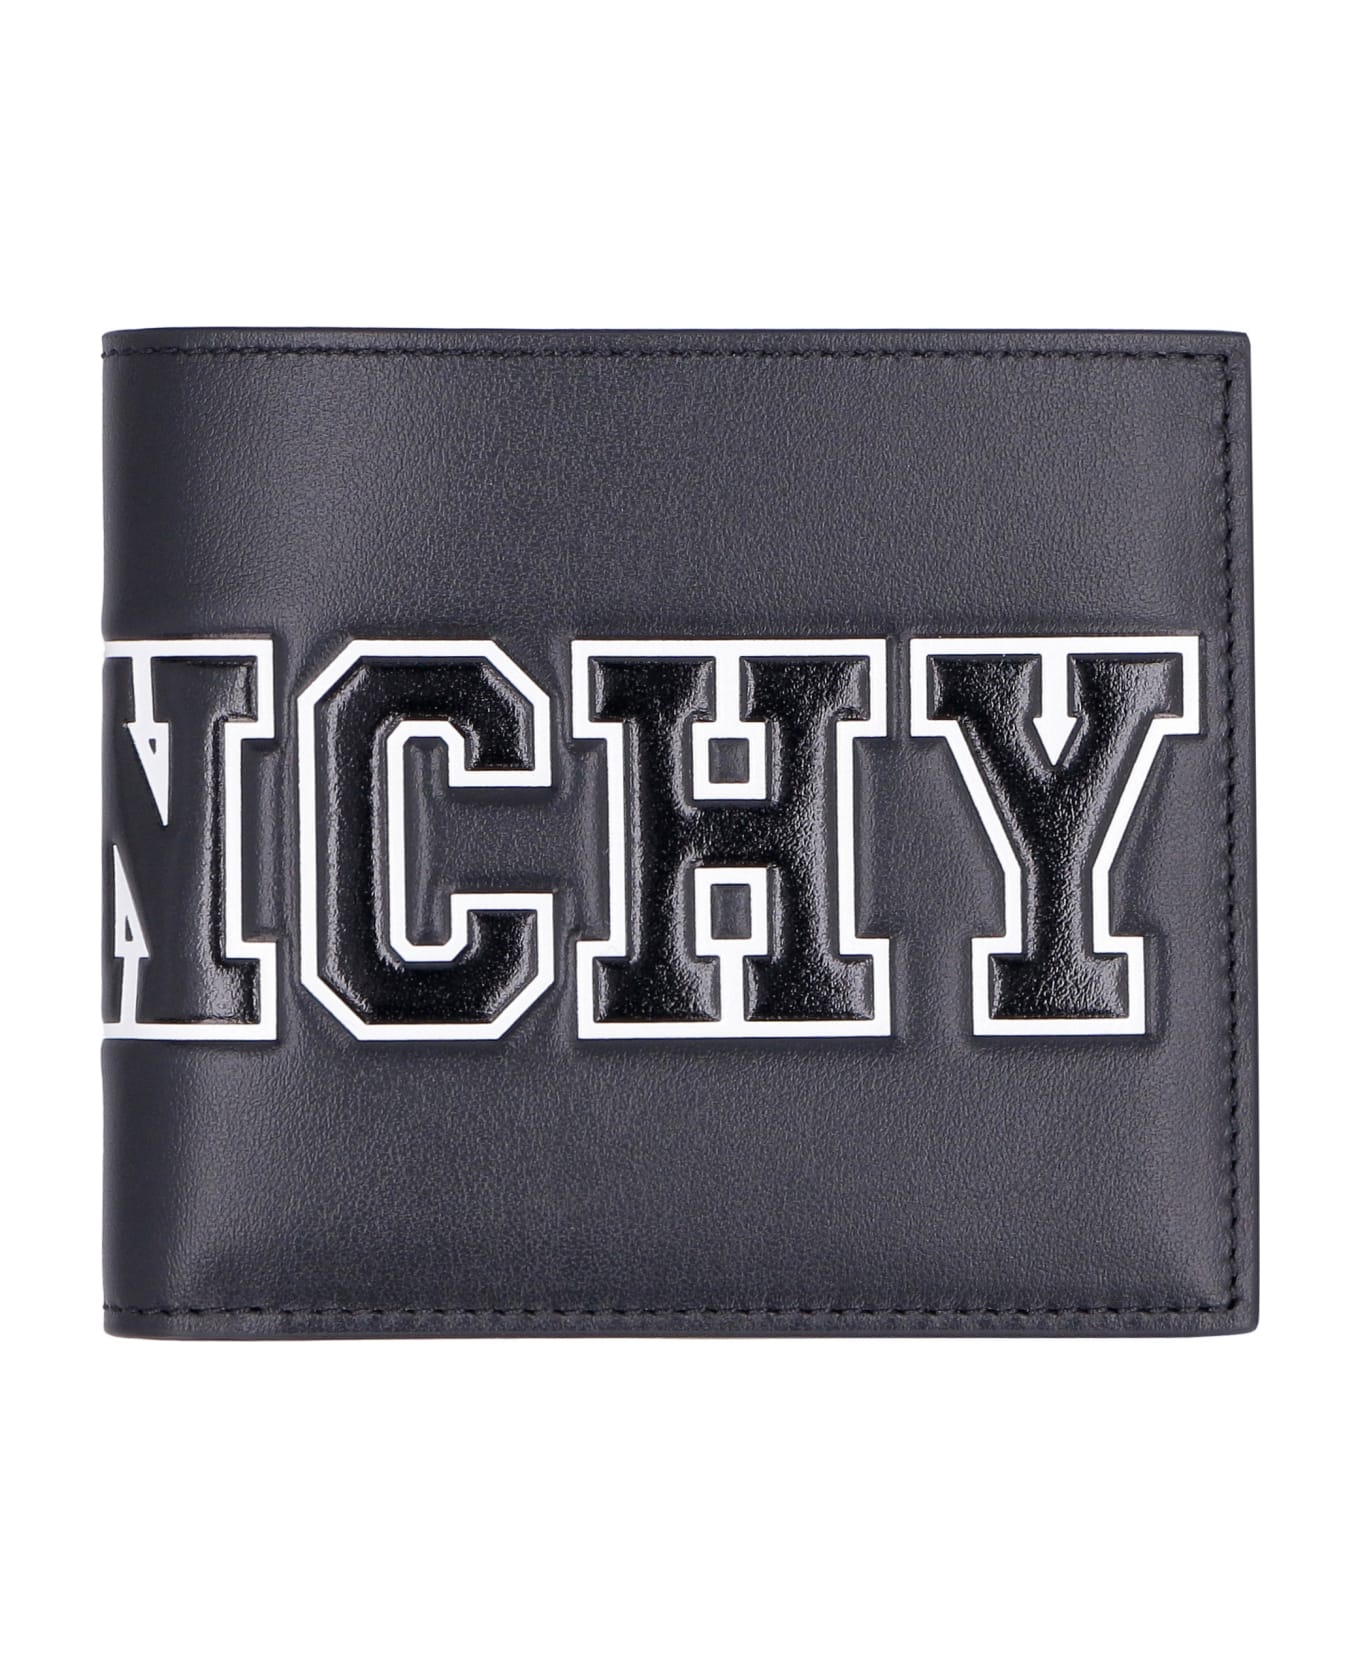 Givenchy Logo Leather Wallet - Black